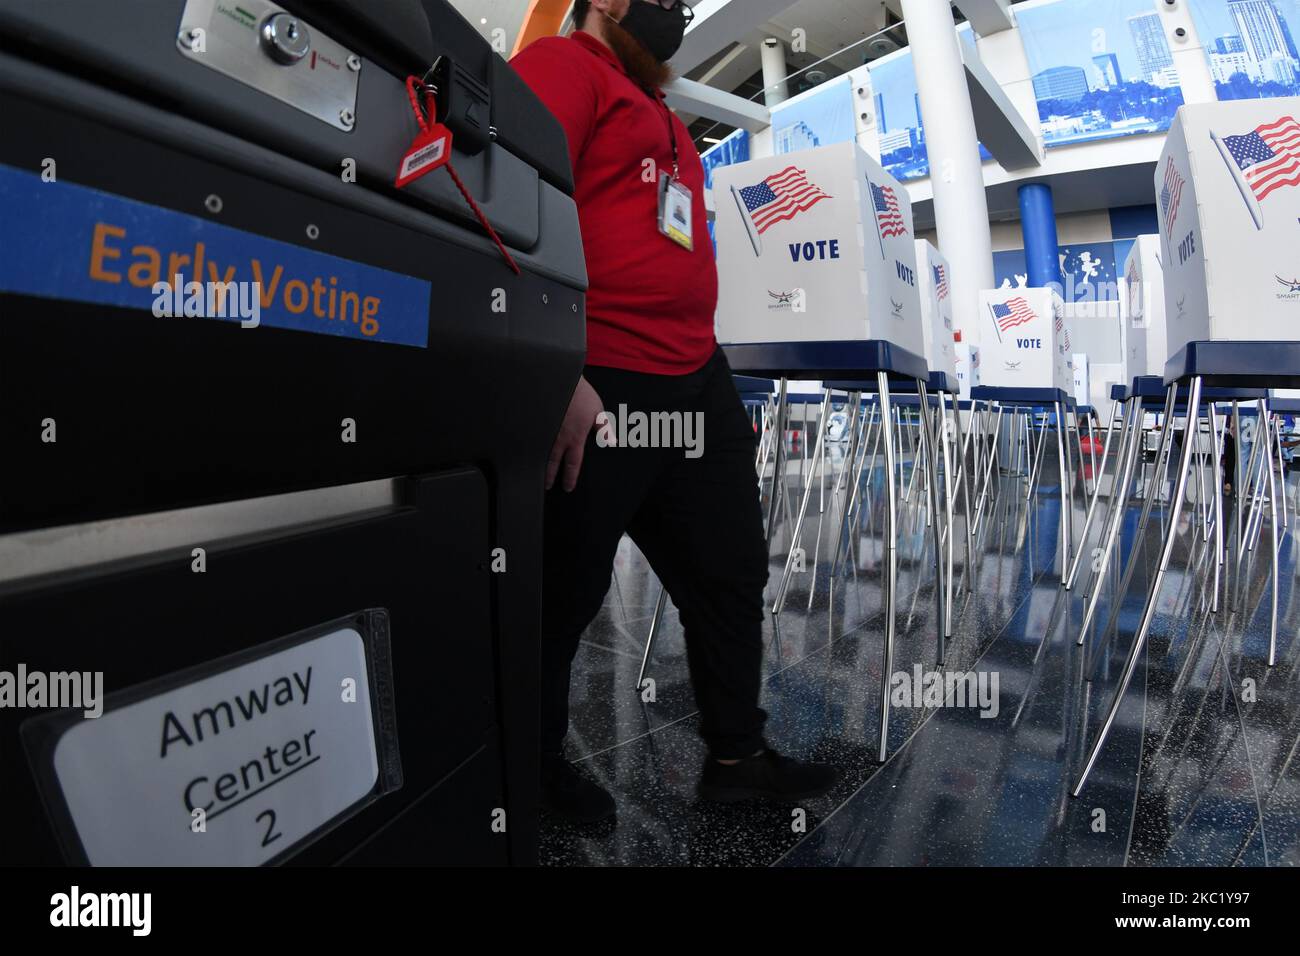 A tabulation machine and voting booths are seen during the set up of an early voting site established by the City of Orlando and the Orlando Magic at the Amway Center, the home arena of the Magic, on October 15, 2020 in Orlando, Florida. Early voting begins in Florida on October 19, 2020. (Photo by Paul Hennessy/NurPhoto) Stock Photo